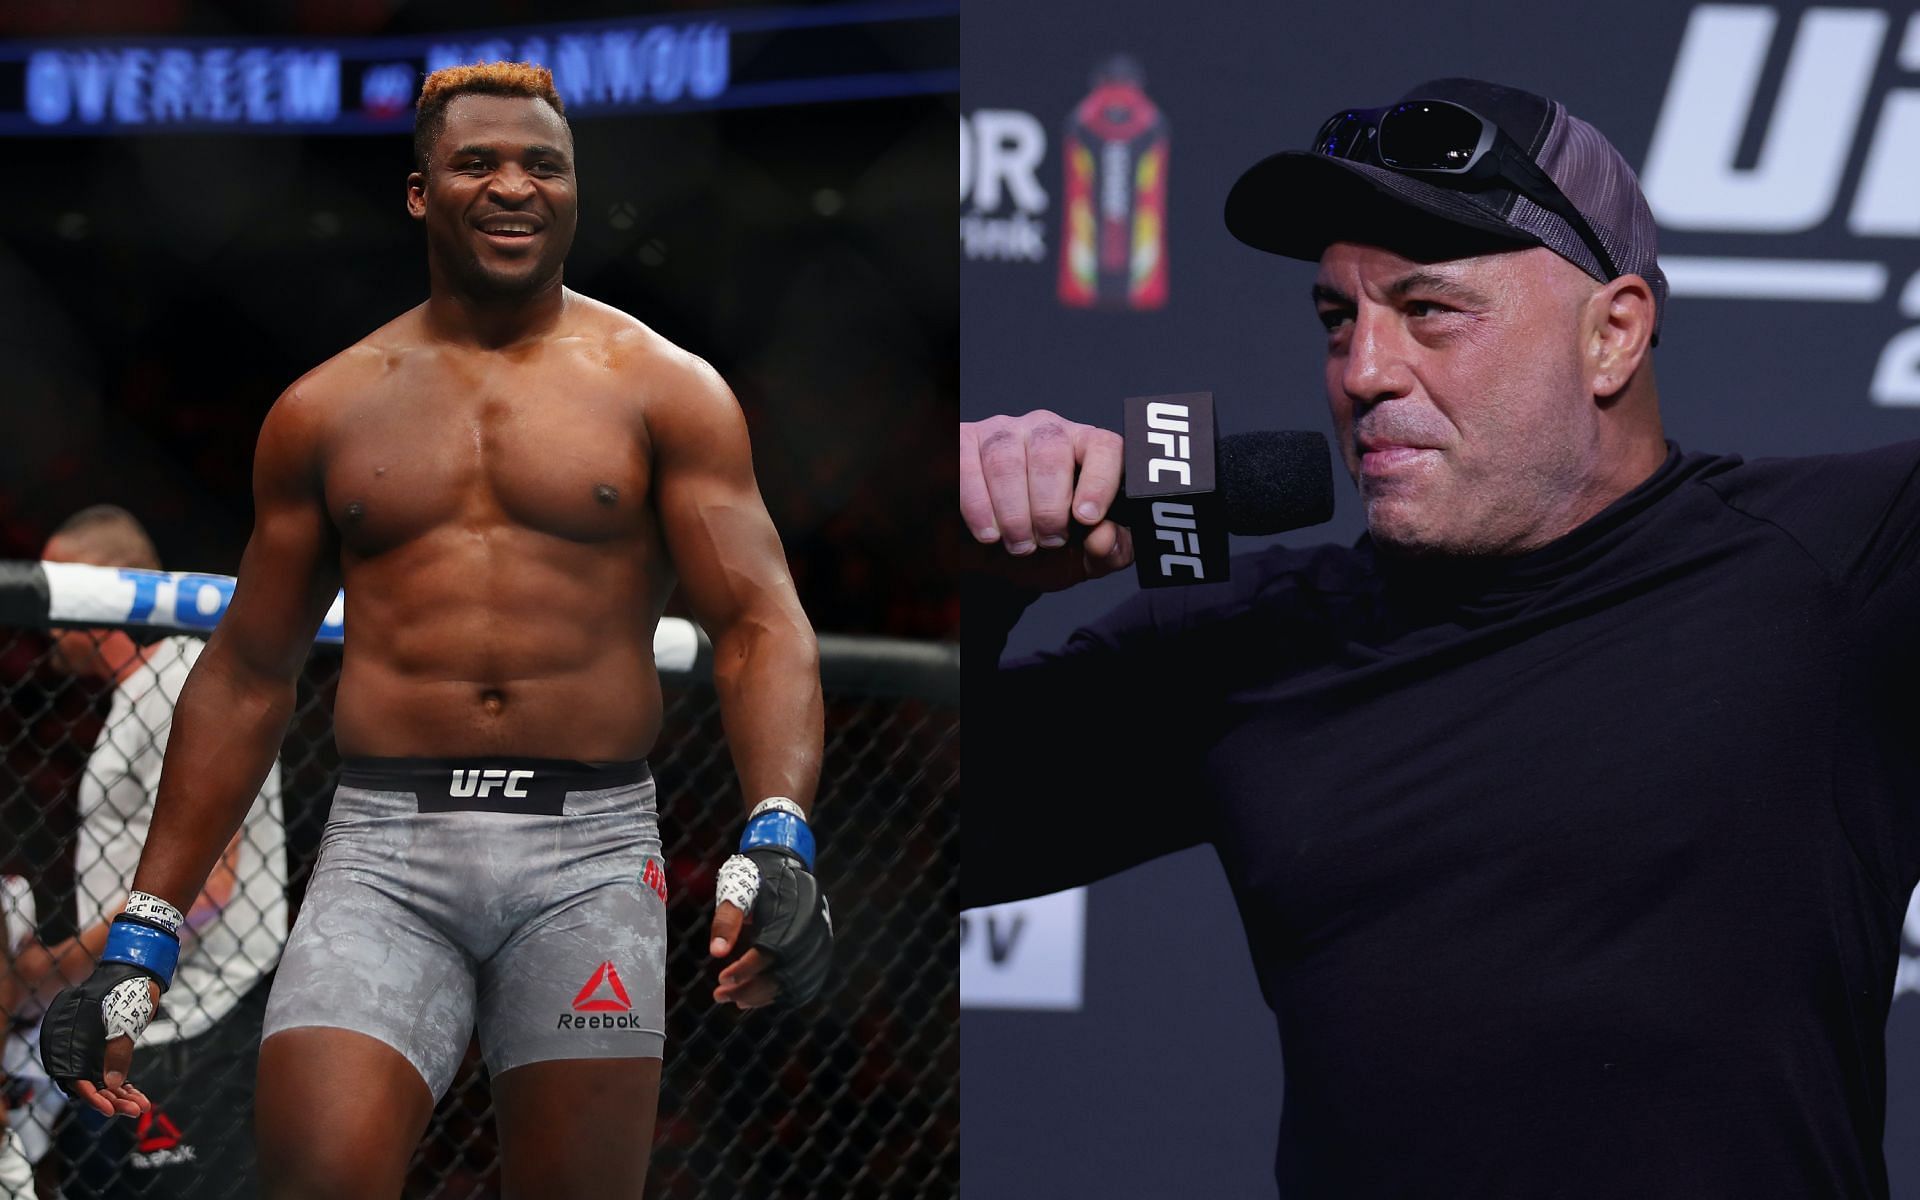 Francis Ngannou (left) and Joe Rogan (right) [Image credits: Getty Images]